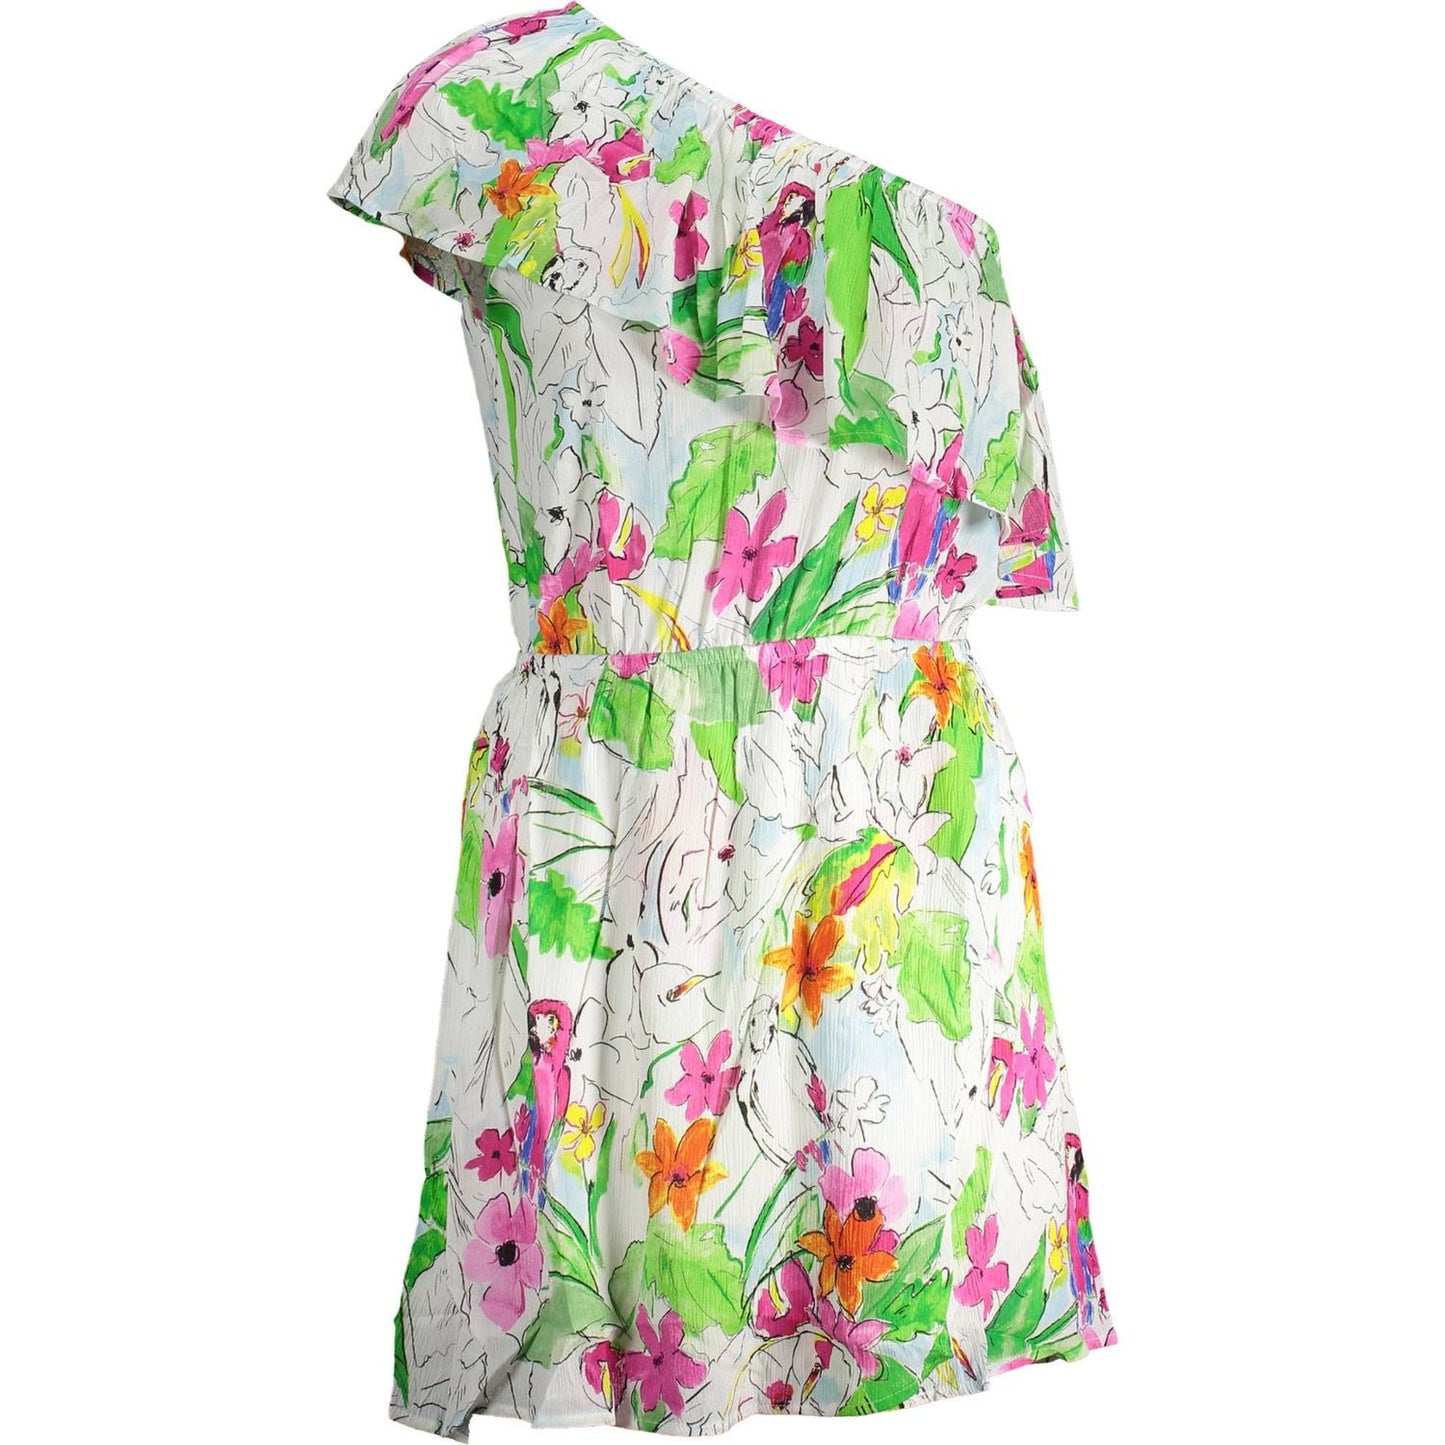 Desigual Chic One-Shoulder Short Dress with Contrasting Details chic-one-shoulder-short-dress-with-contrasting-details